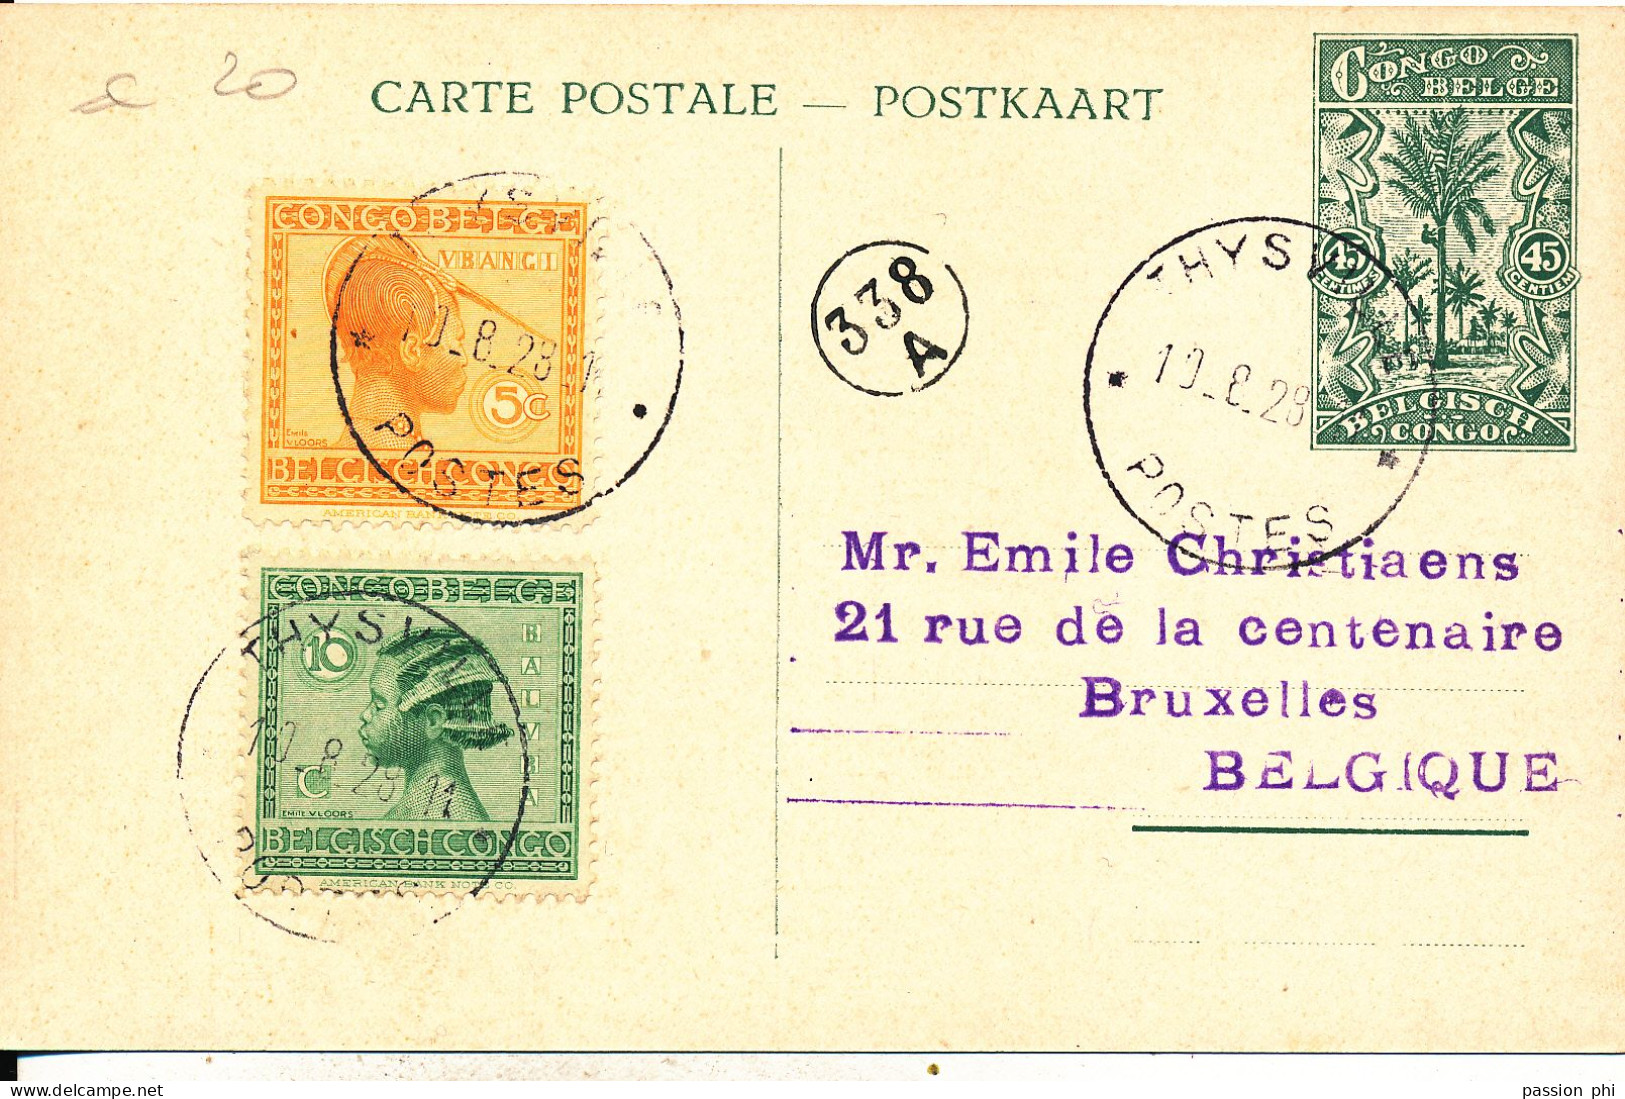 BELGIAN CONGO 1912 ISSUE PPS SBEP 66a VIEW 16 USED - Interi Postali